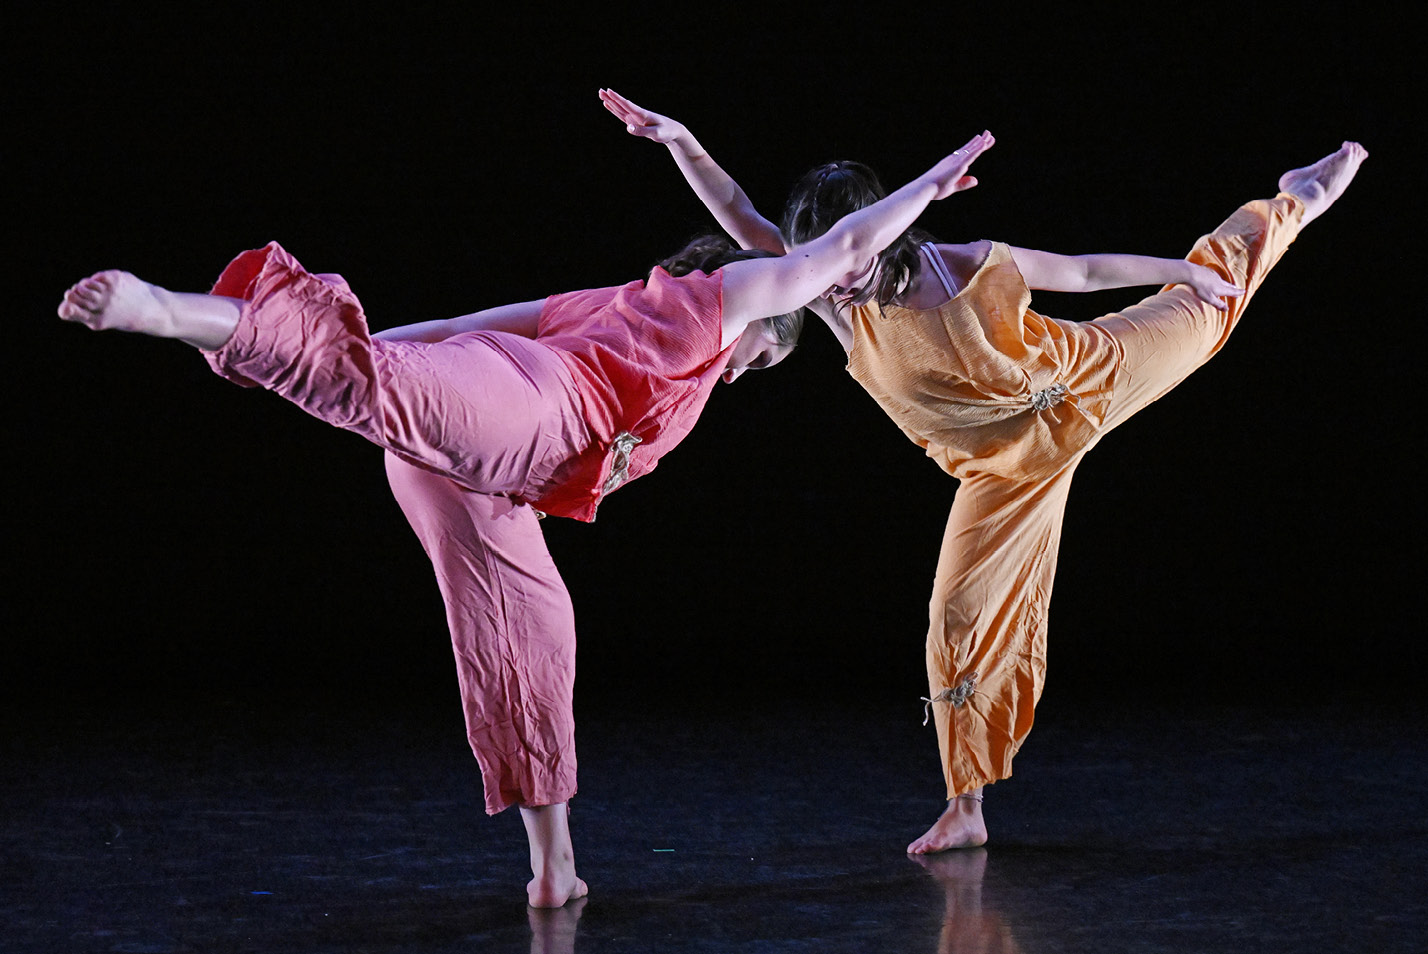 Dancers perform at Department of Dance Student Works Concert dress rehearsal in the Martha Meyers Dance Studio in late February.